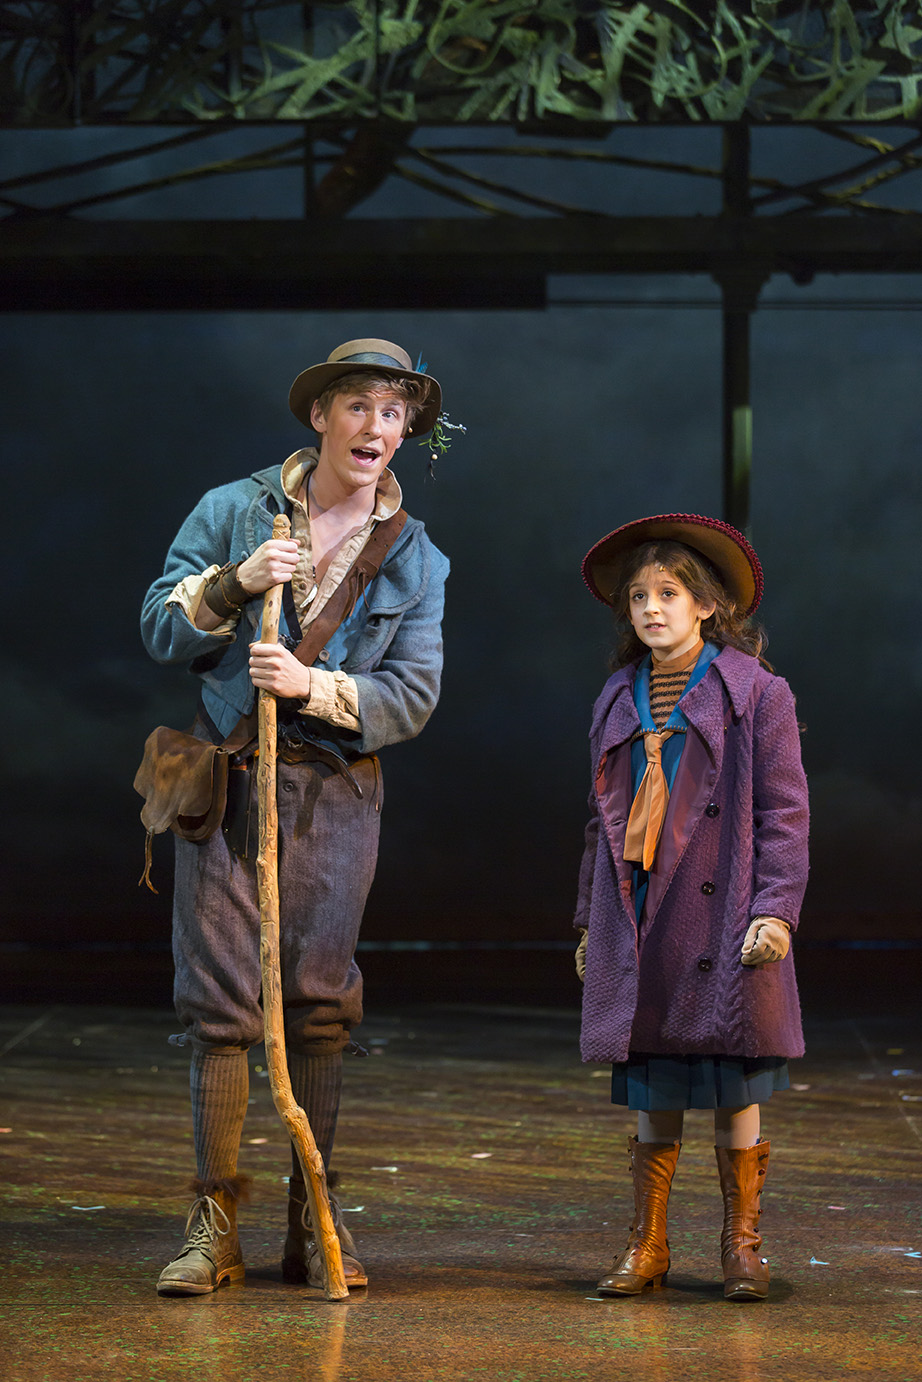 Dickon (Charlie Franklin) and Mary (Anya Rothman) in a photo from the Shakespeare Theatre Company's revival of The Secret Garden, 2016-2017 (Image from Shakespeare Theatre Company).